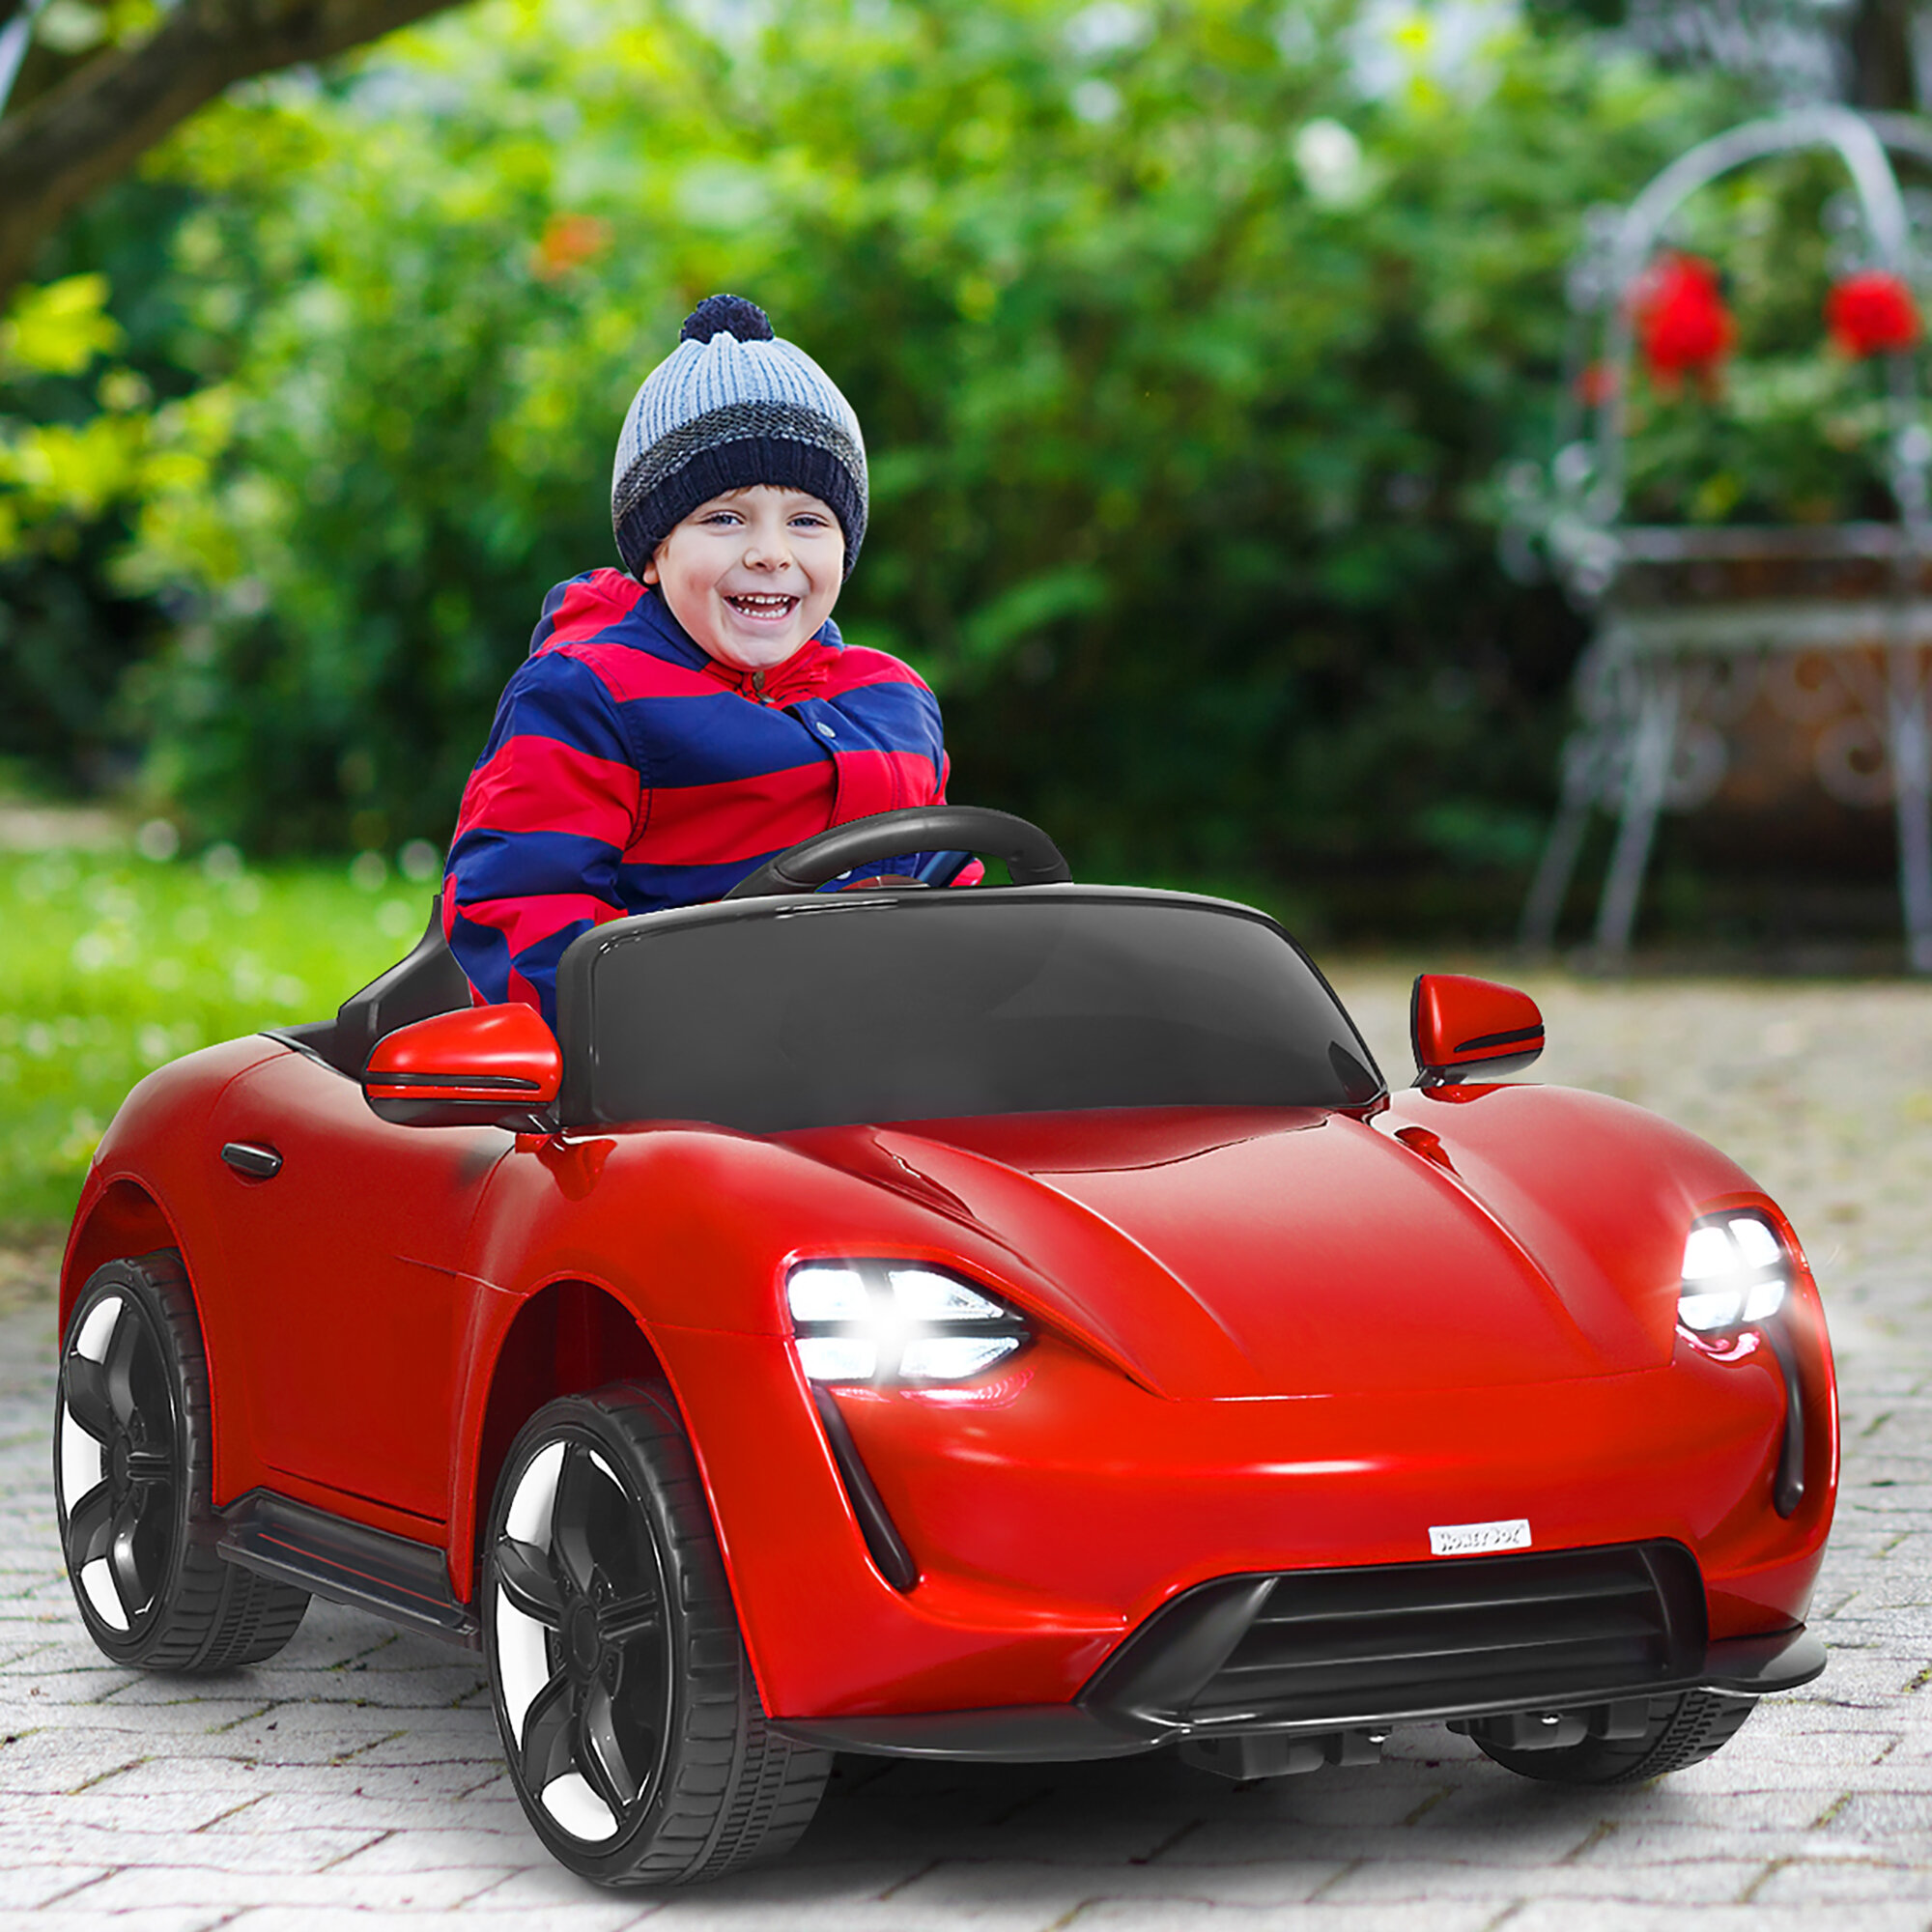 Kids Ride on Powered Eletric Car/Vehicle Remote Control,One Single Seat Red 